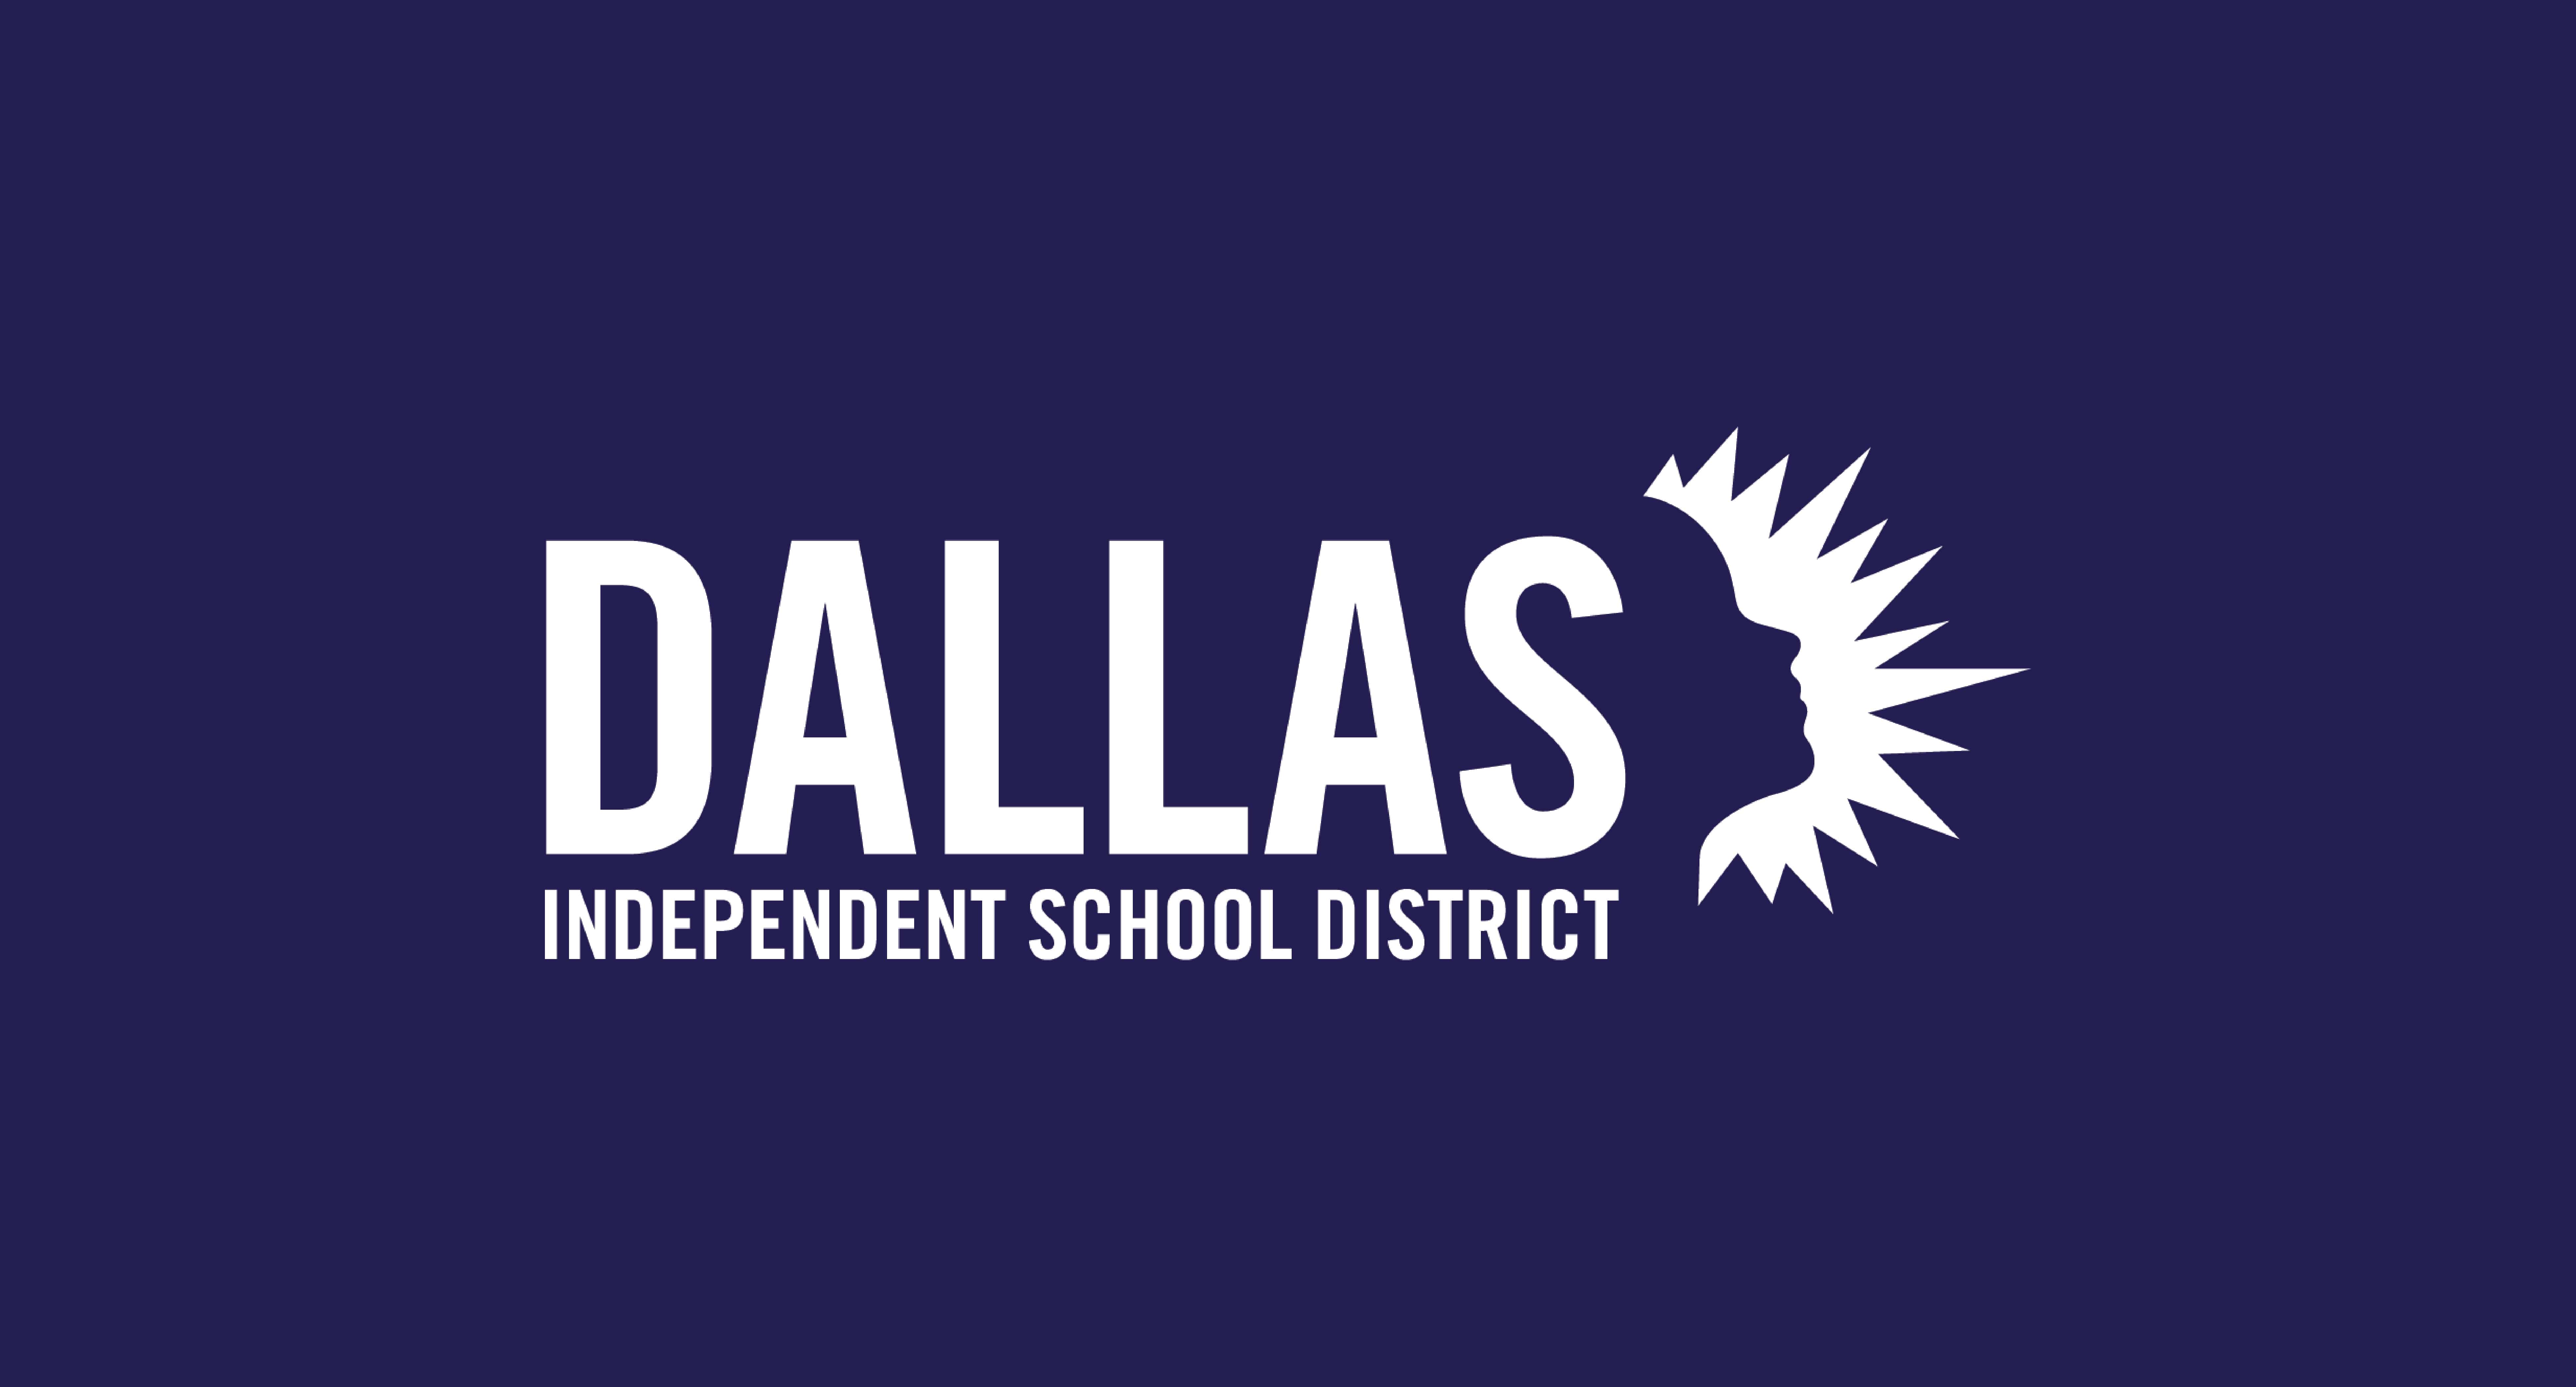 CQC partners with one of the largest K-12 School districts in Texas